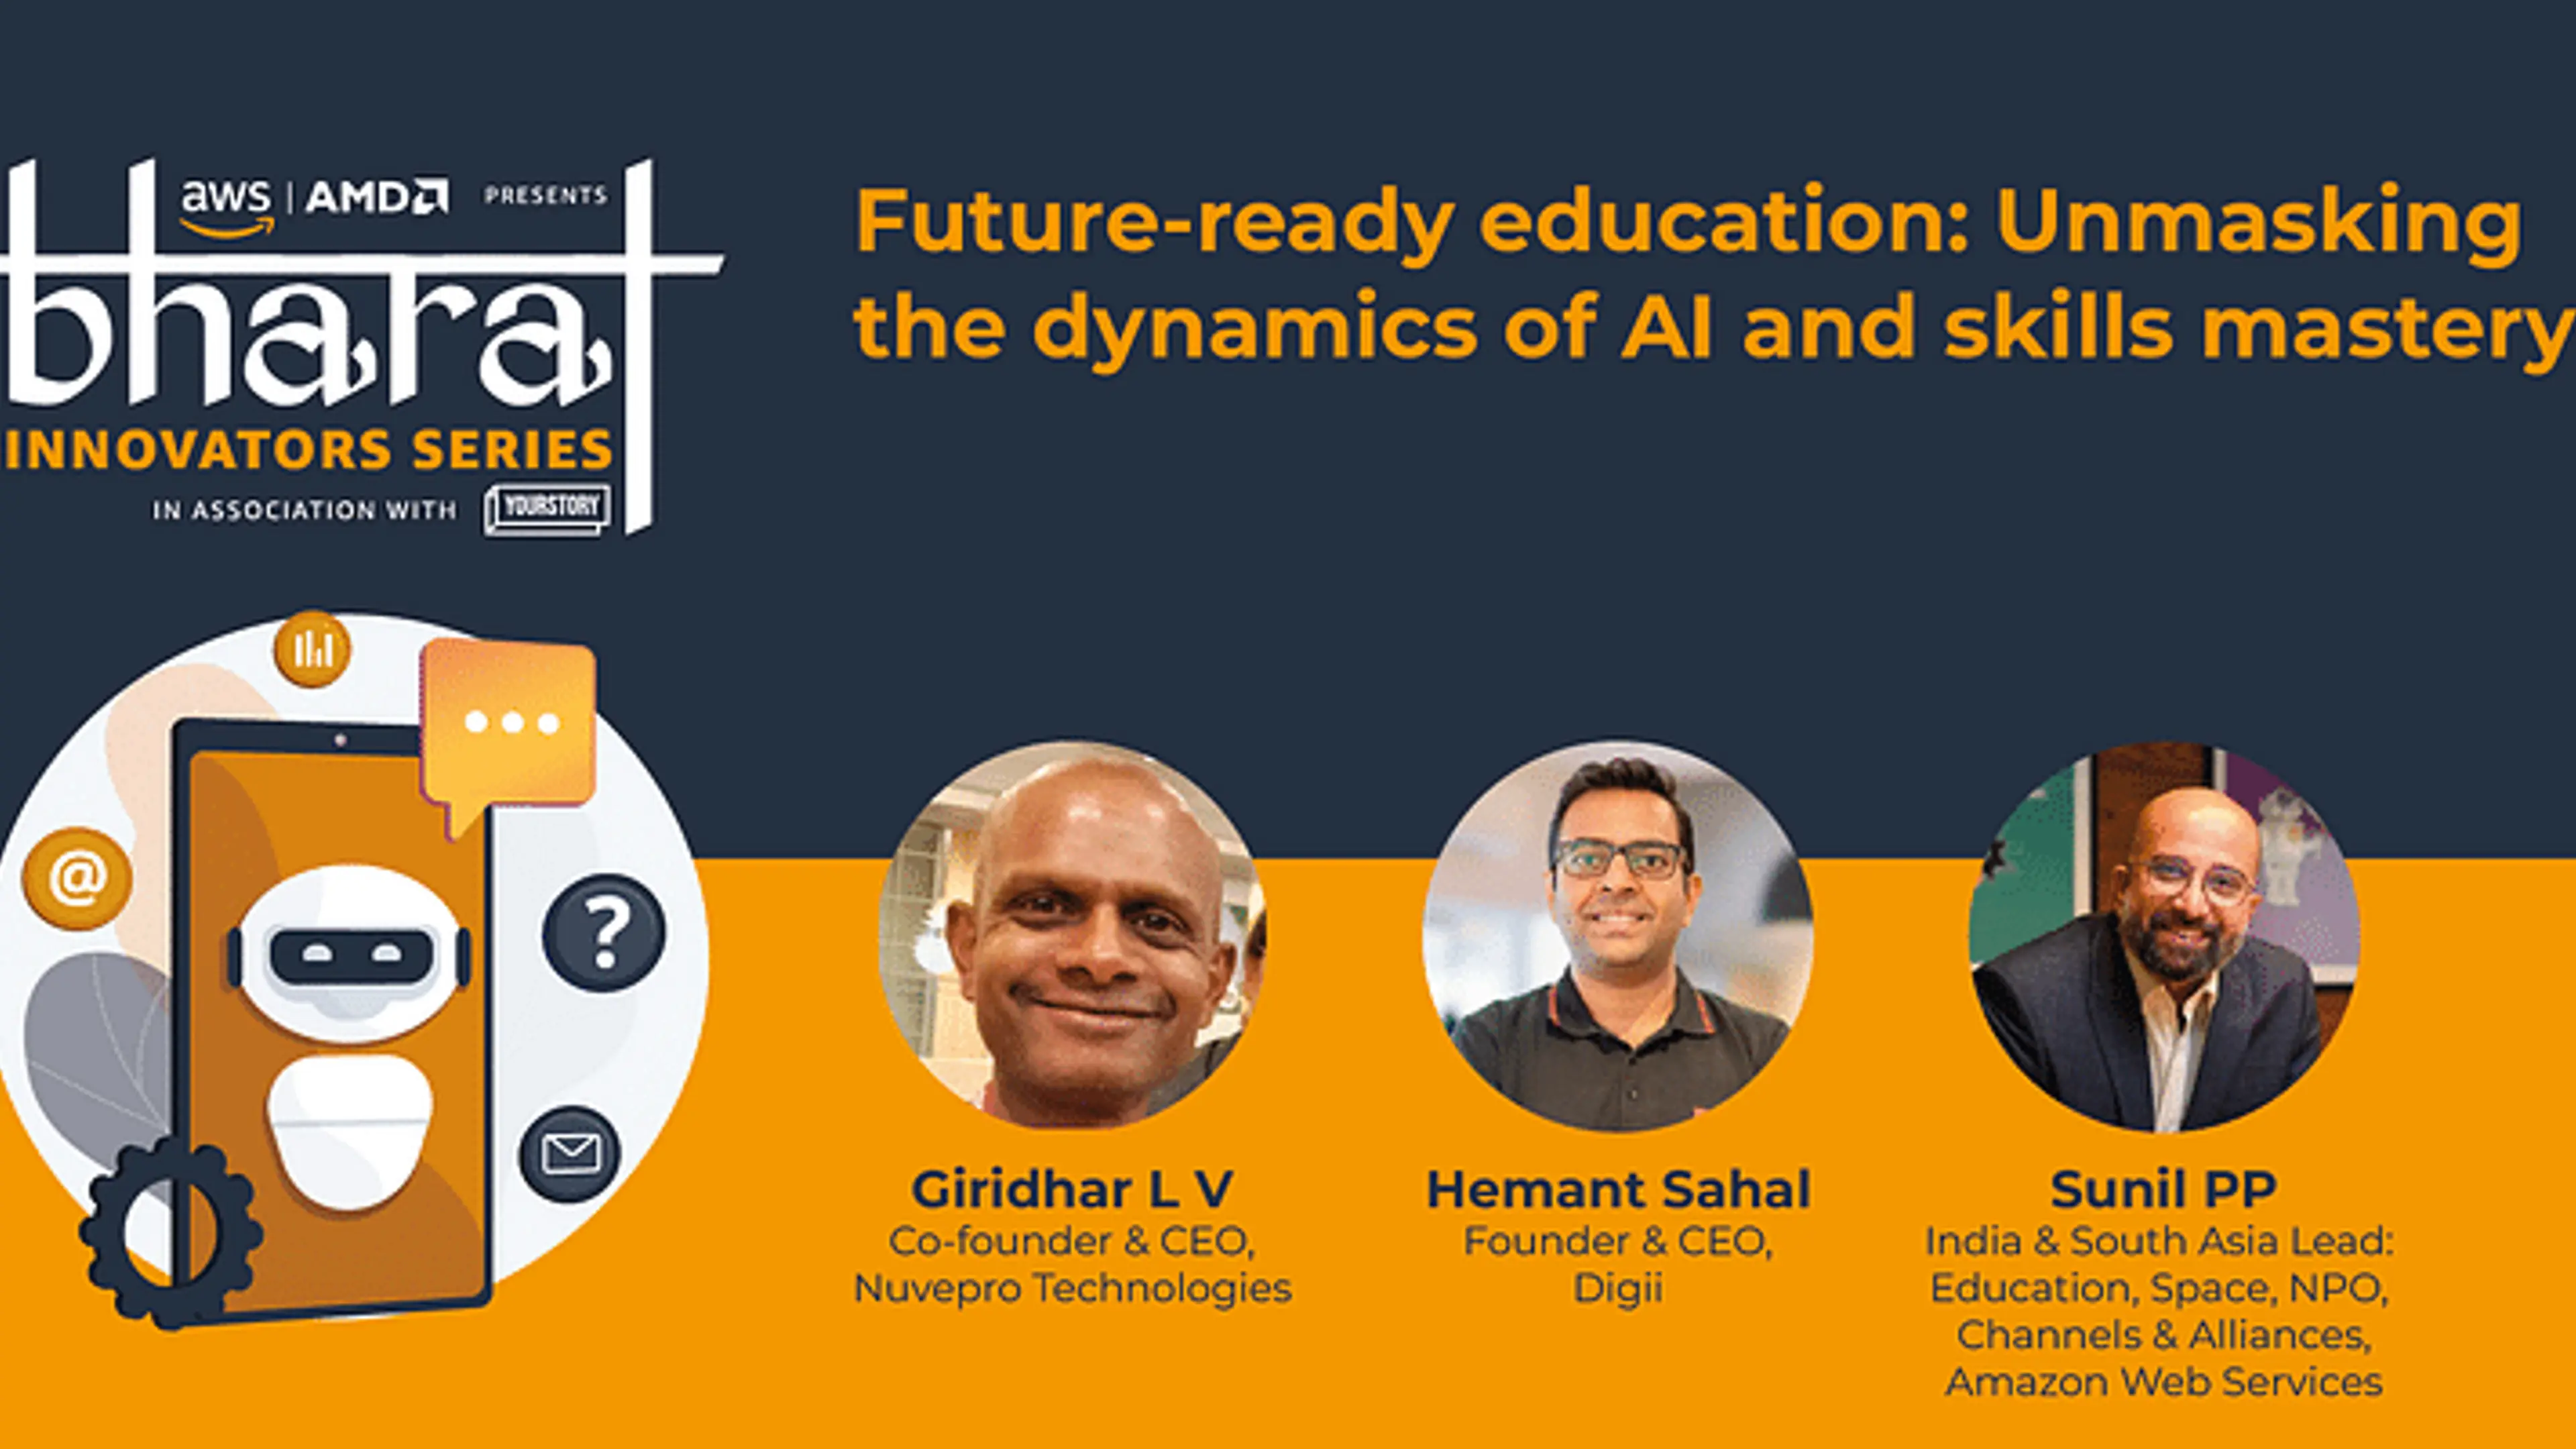 Collaboration is key: Industry experts discuss reimagining education with AI